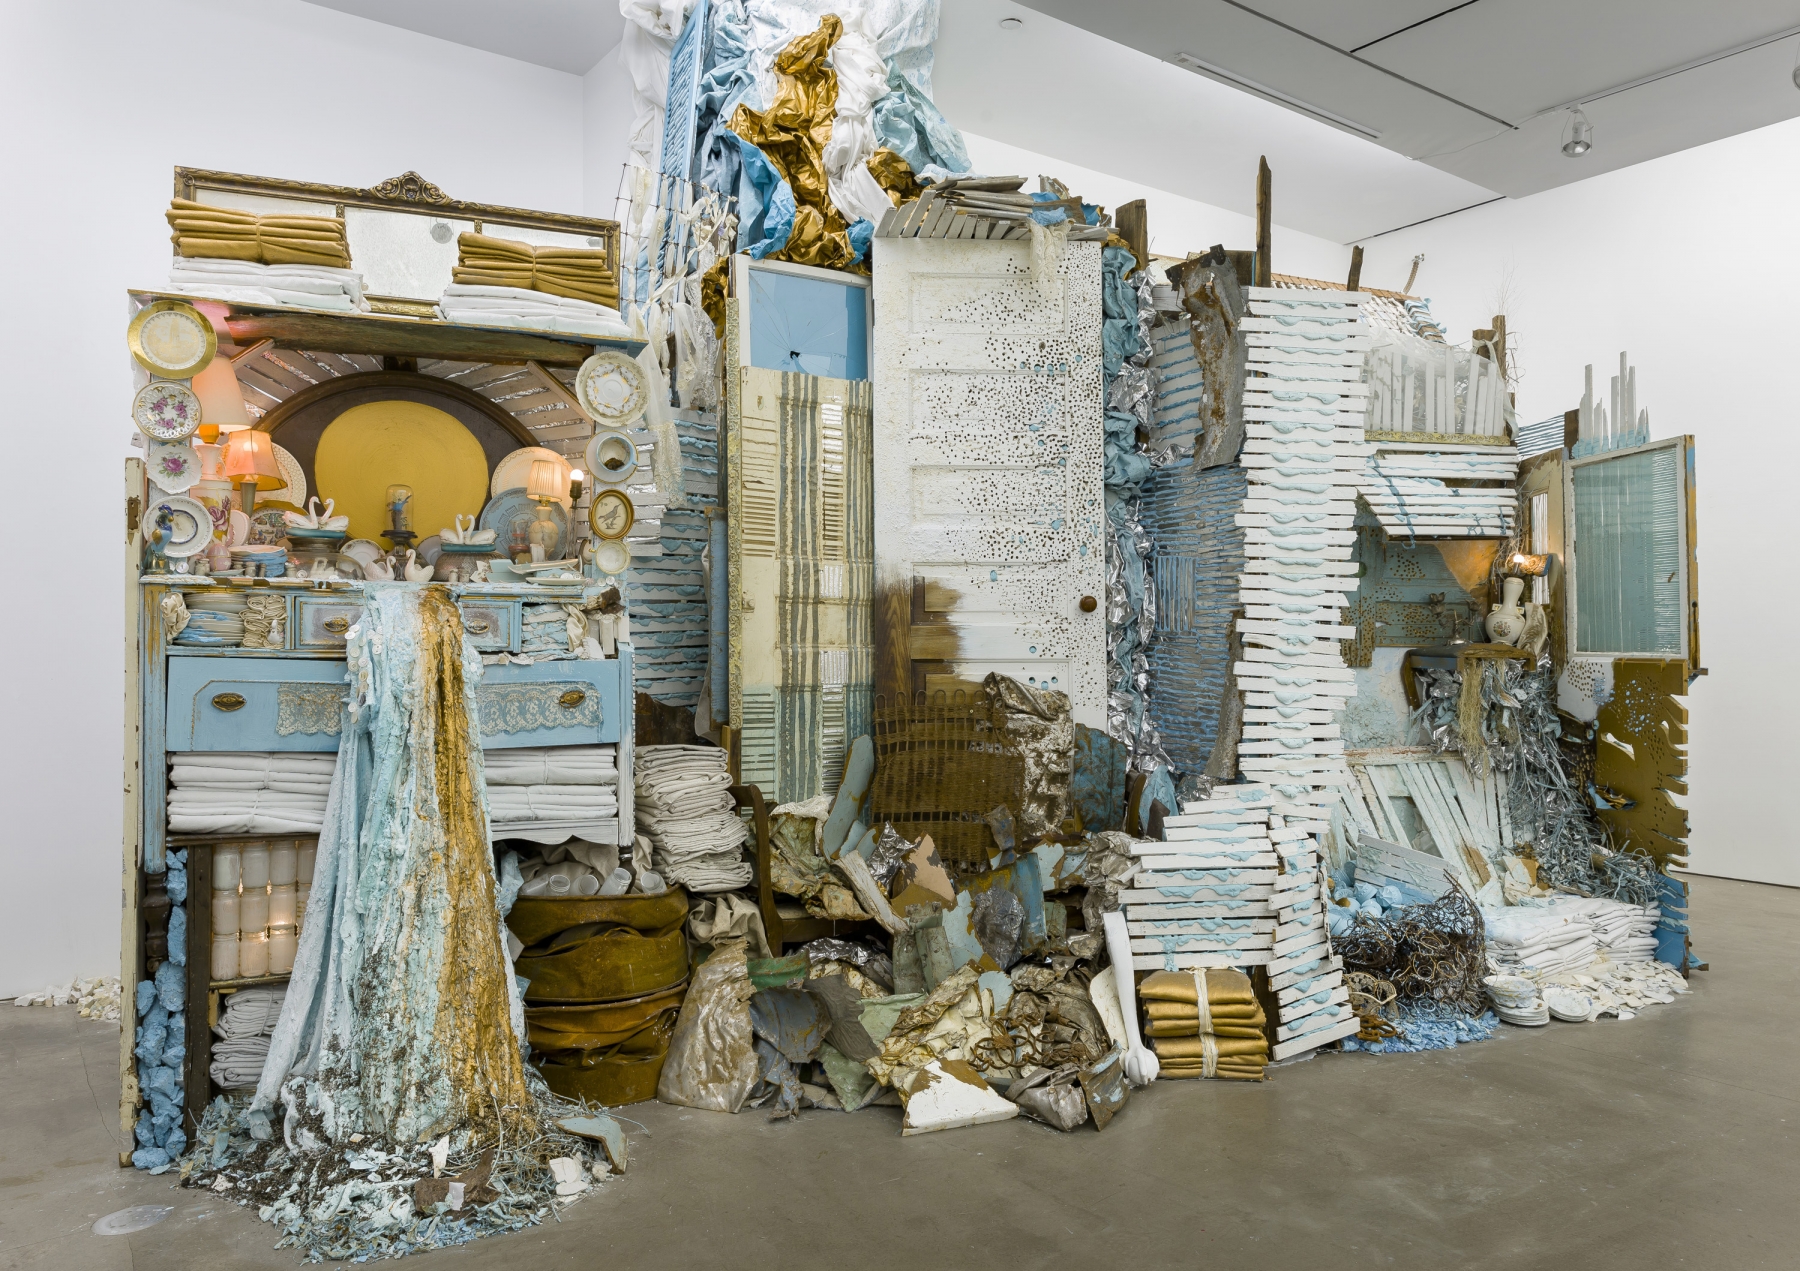 &amp;quot;Swan Song&amp;quot;, 2015, reclaimed lath, wood, marble, iron, paper, vintage furniture, dishware, figurines, natural debris, crushed reclaimed metal, light fixtures, vintage wedding dresses, bathtub, wallpaper, plaster, and paint.